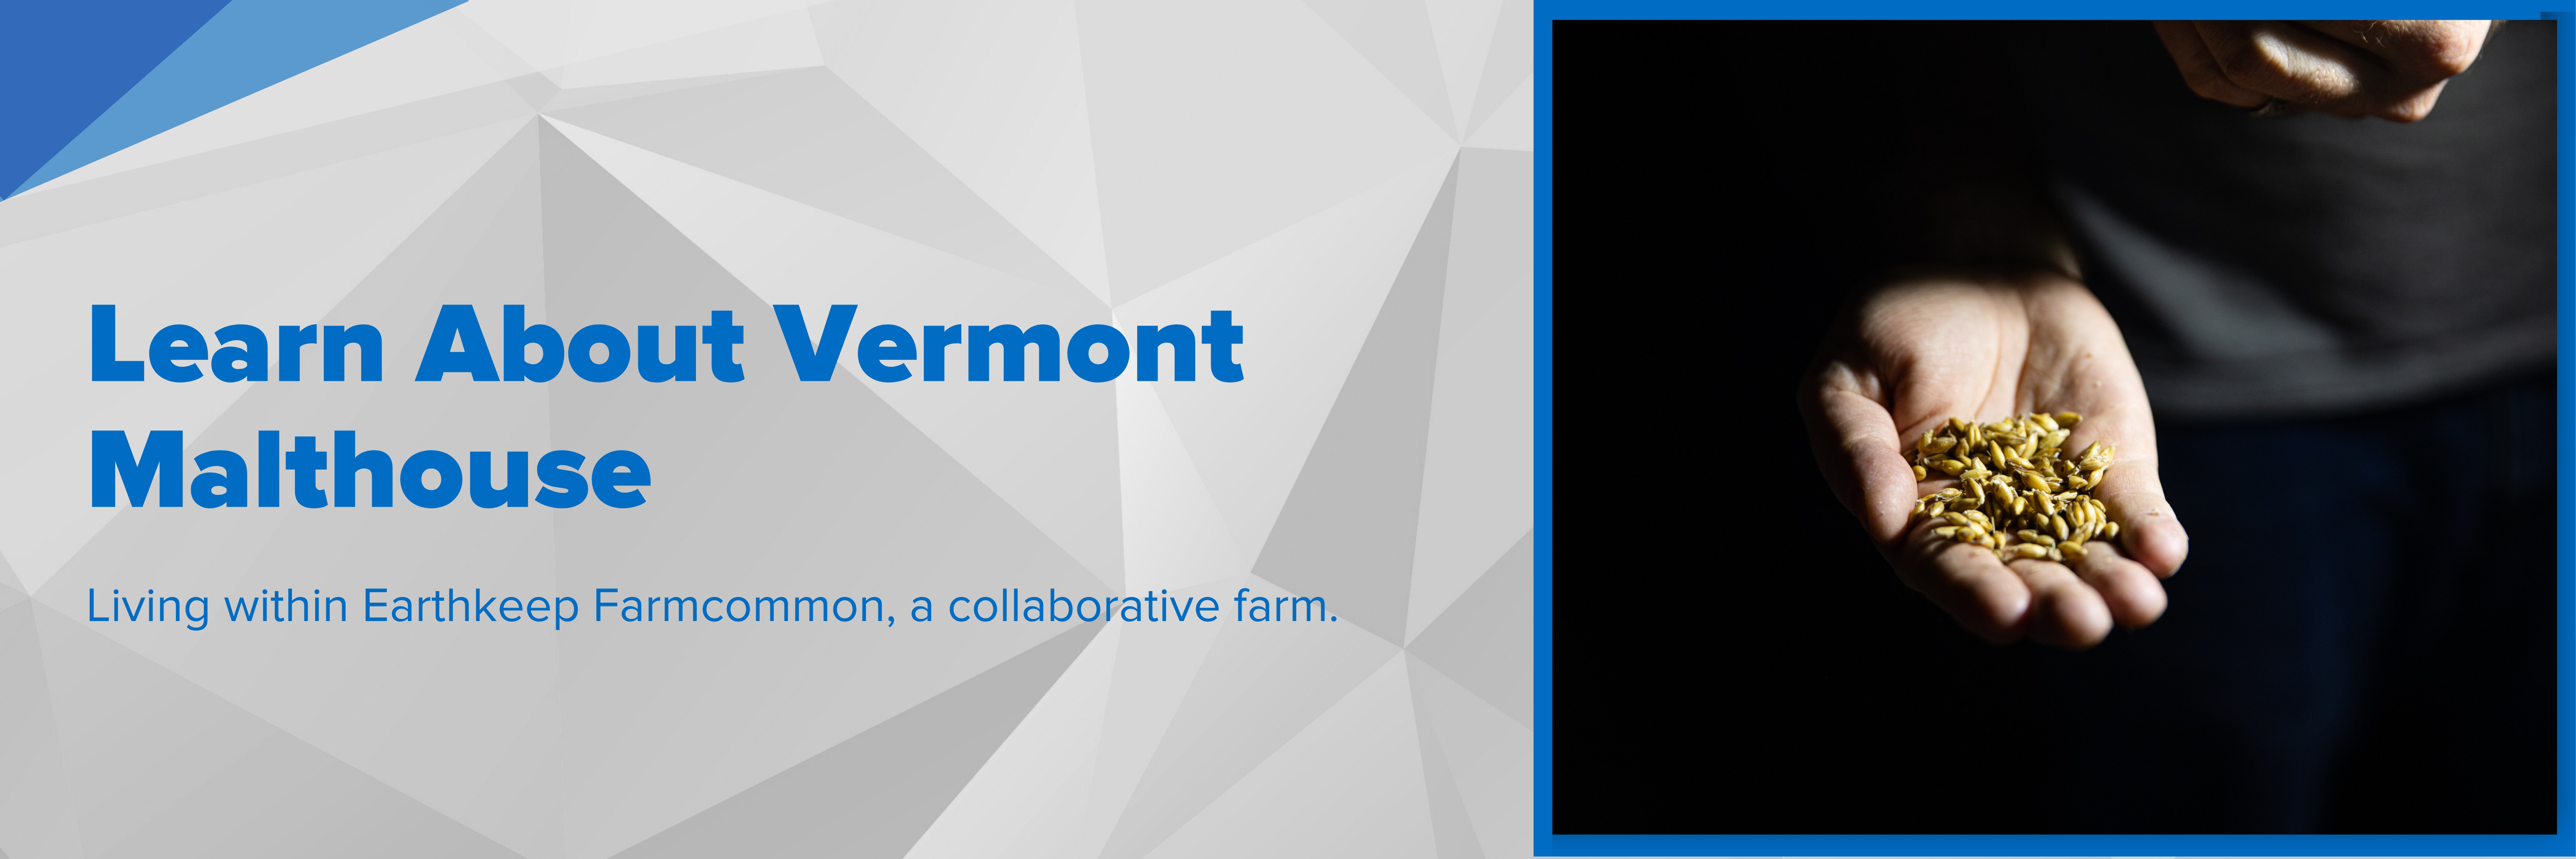 Header image with text "Learn About Vermont Malthouse."